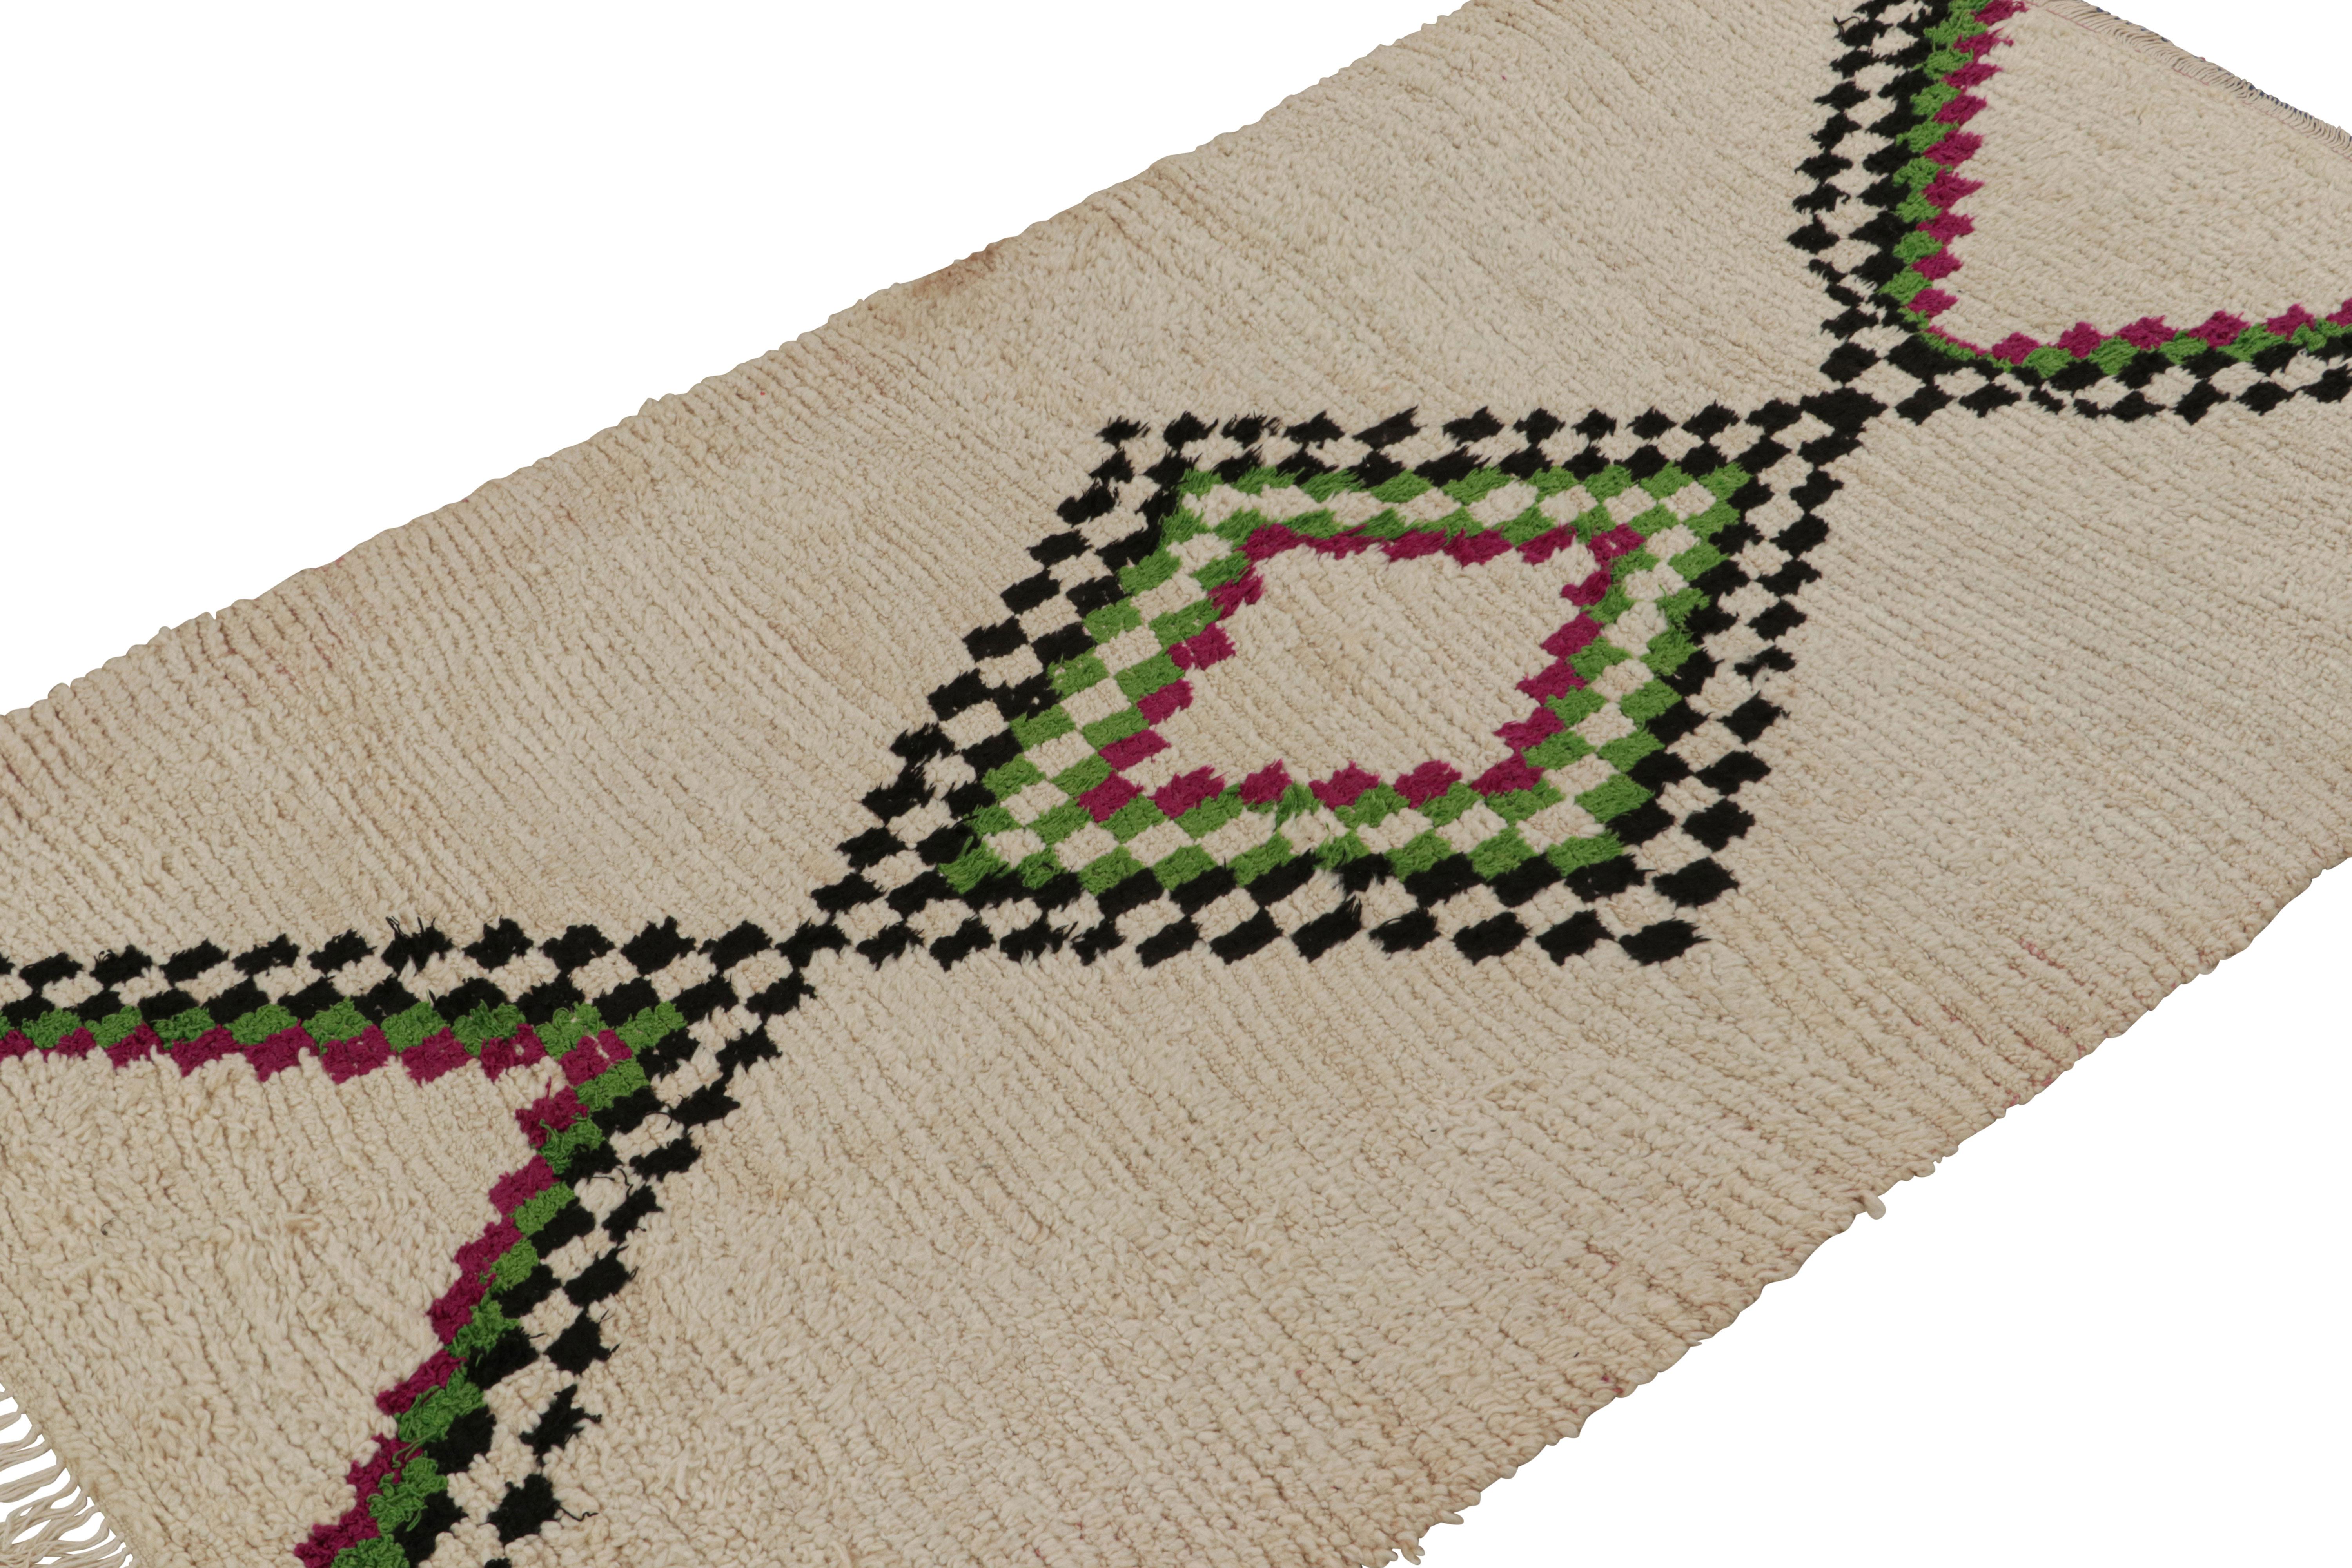 Hand-knotted in wool circa 1950-1960, this 4x6 vintage Moroccan runner rug in beige with colorful medallion, hails from the Azilal tribe.  

On the Design: 

This piece enjoys a lush high pile with primitivist Berber geometric diamond medallion or